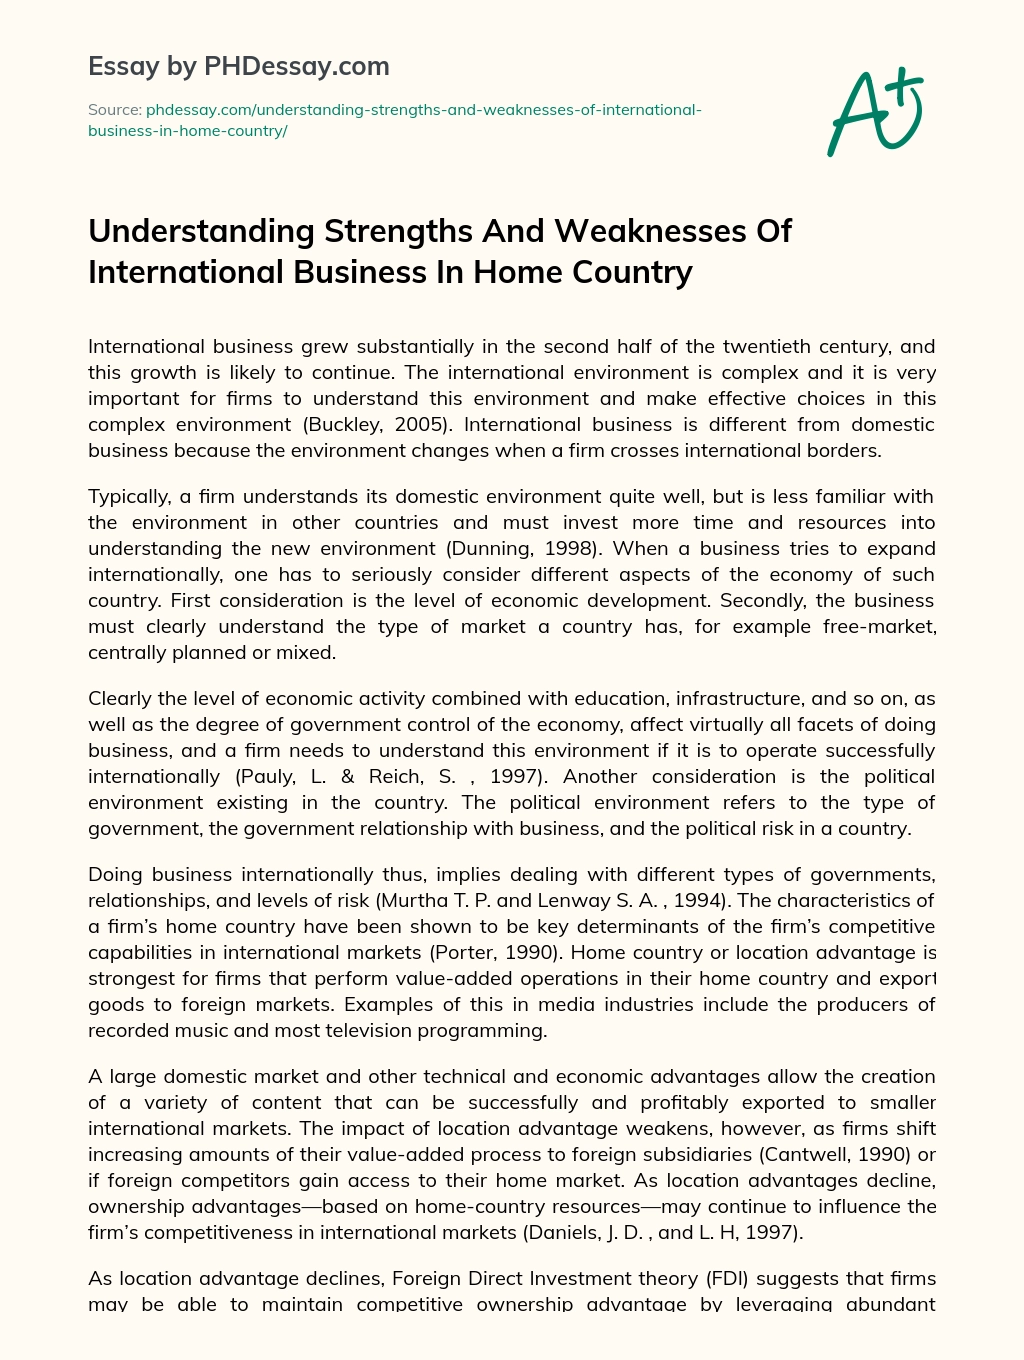 Understanding Strengths And Weaknesses Of International Business In Home Country essay